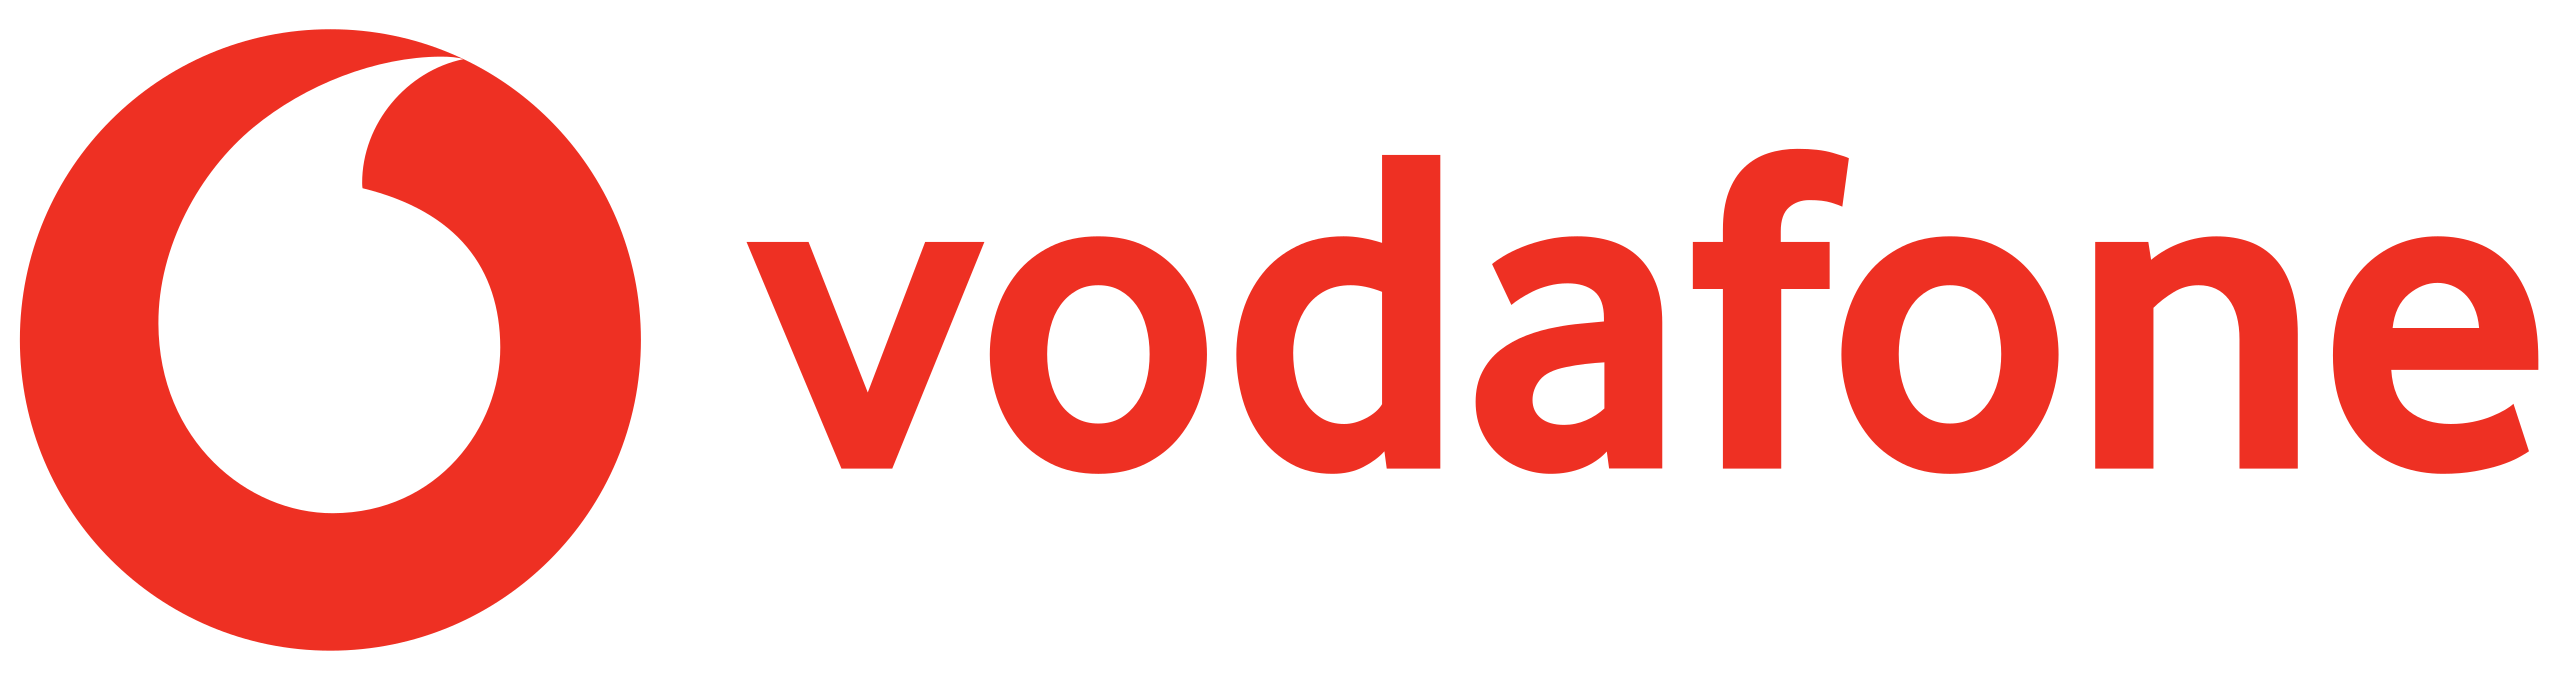 Vodafone | EAG Recycling